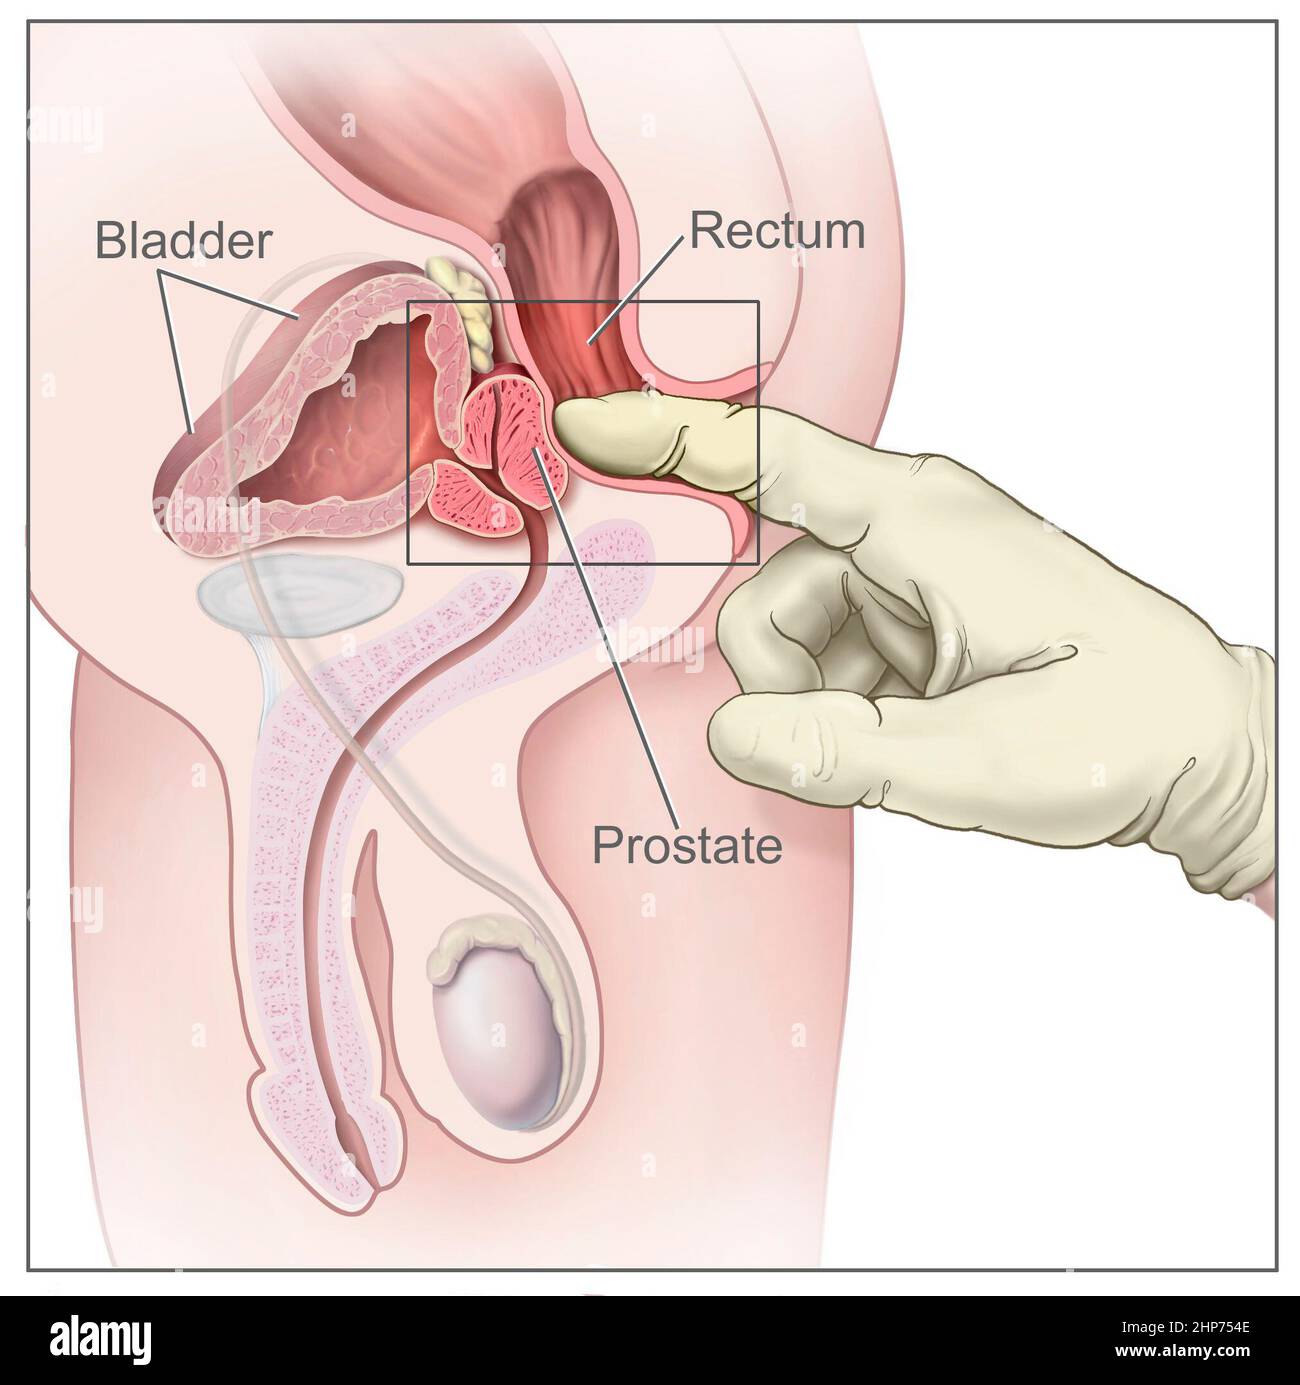 Digital rectal exam; drawing shows a side view of the male reproductive and urinary anatomy, including the prostate, rectum, and bladder; also shows a gloved and lubricated finger inserted into the rectum to feel the prostate. ca.  2008 Stock Photo